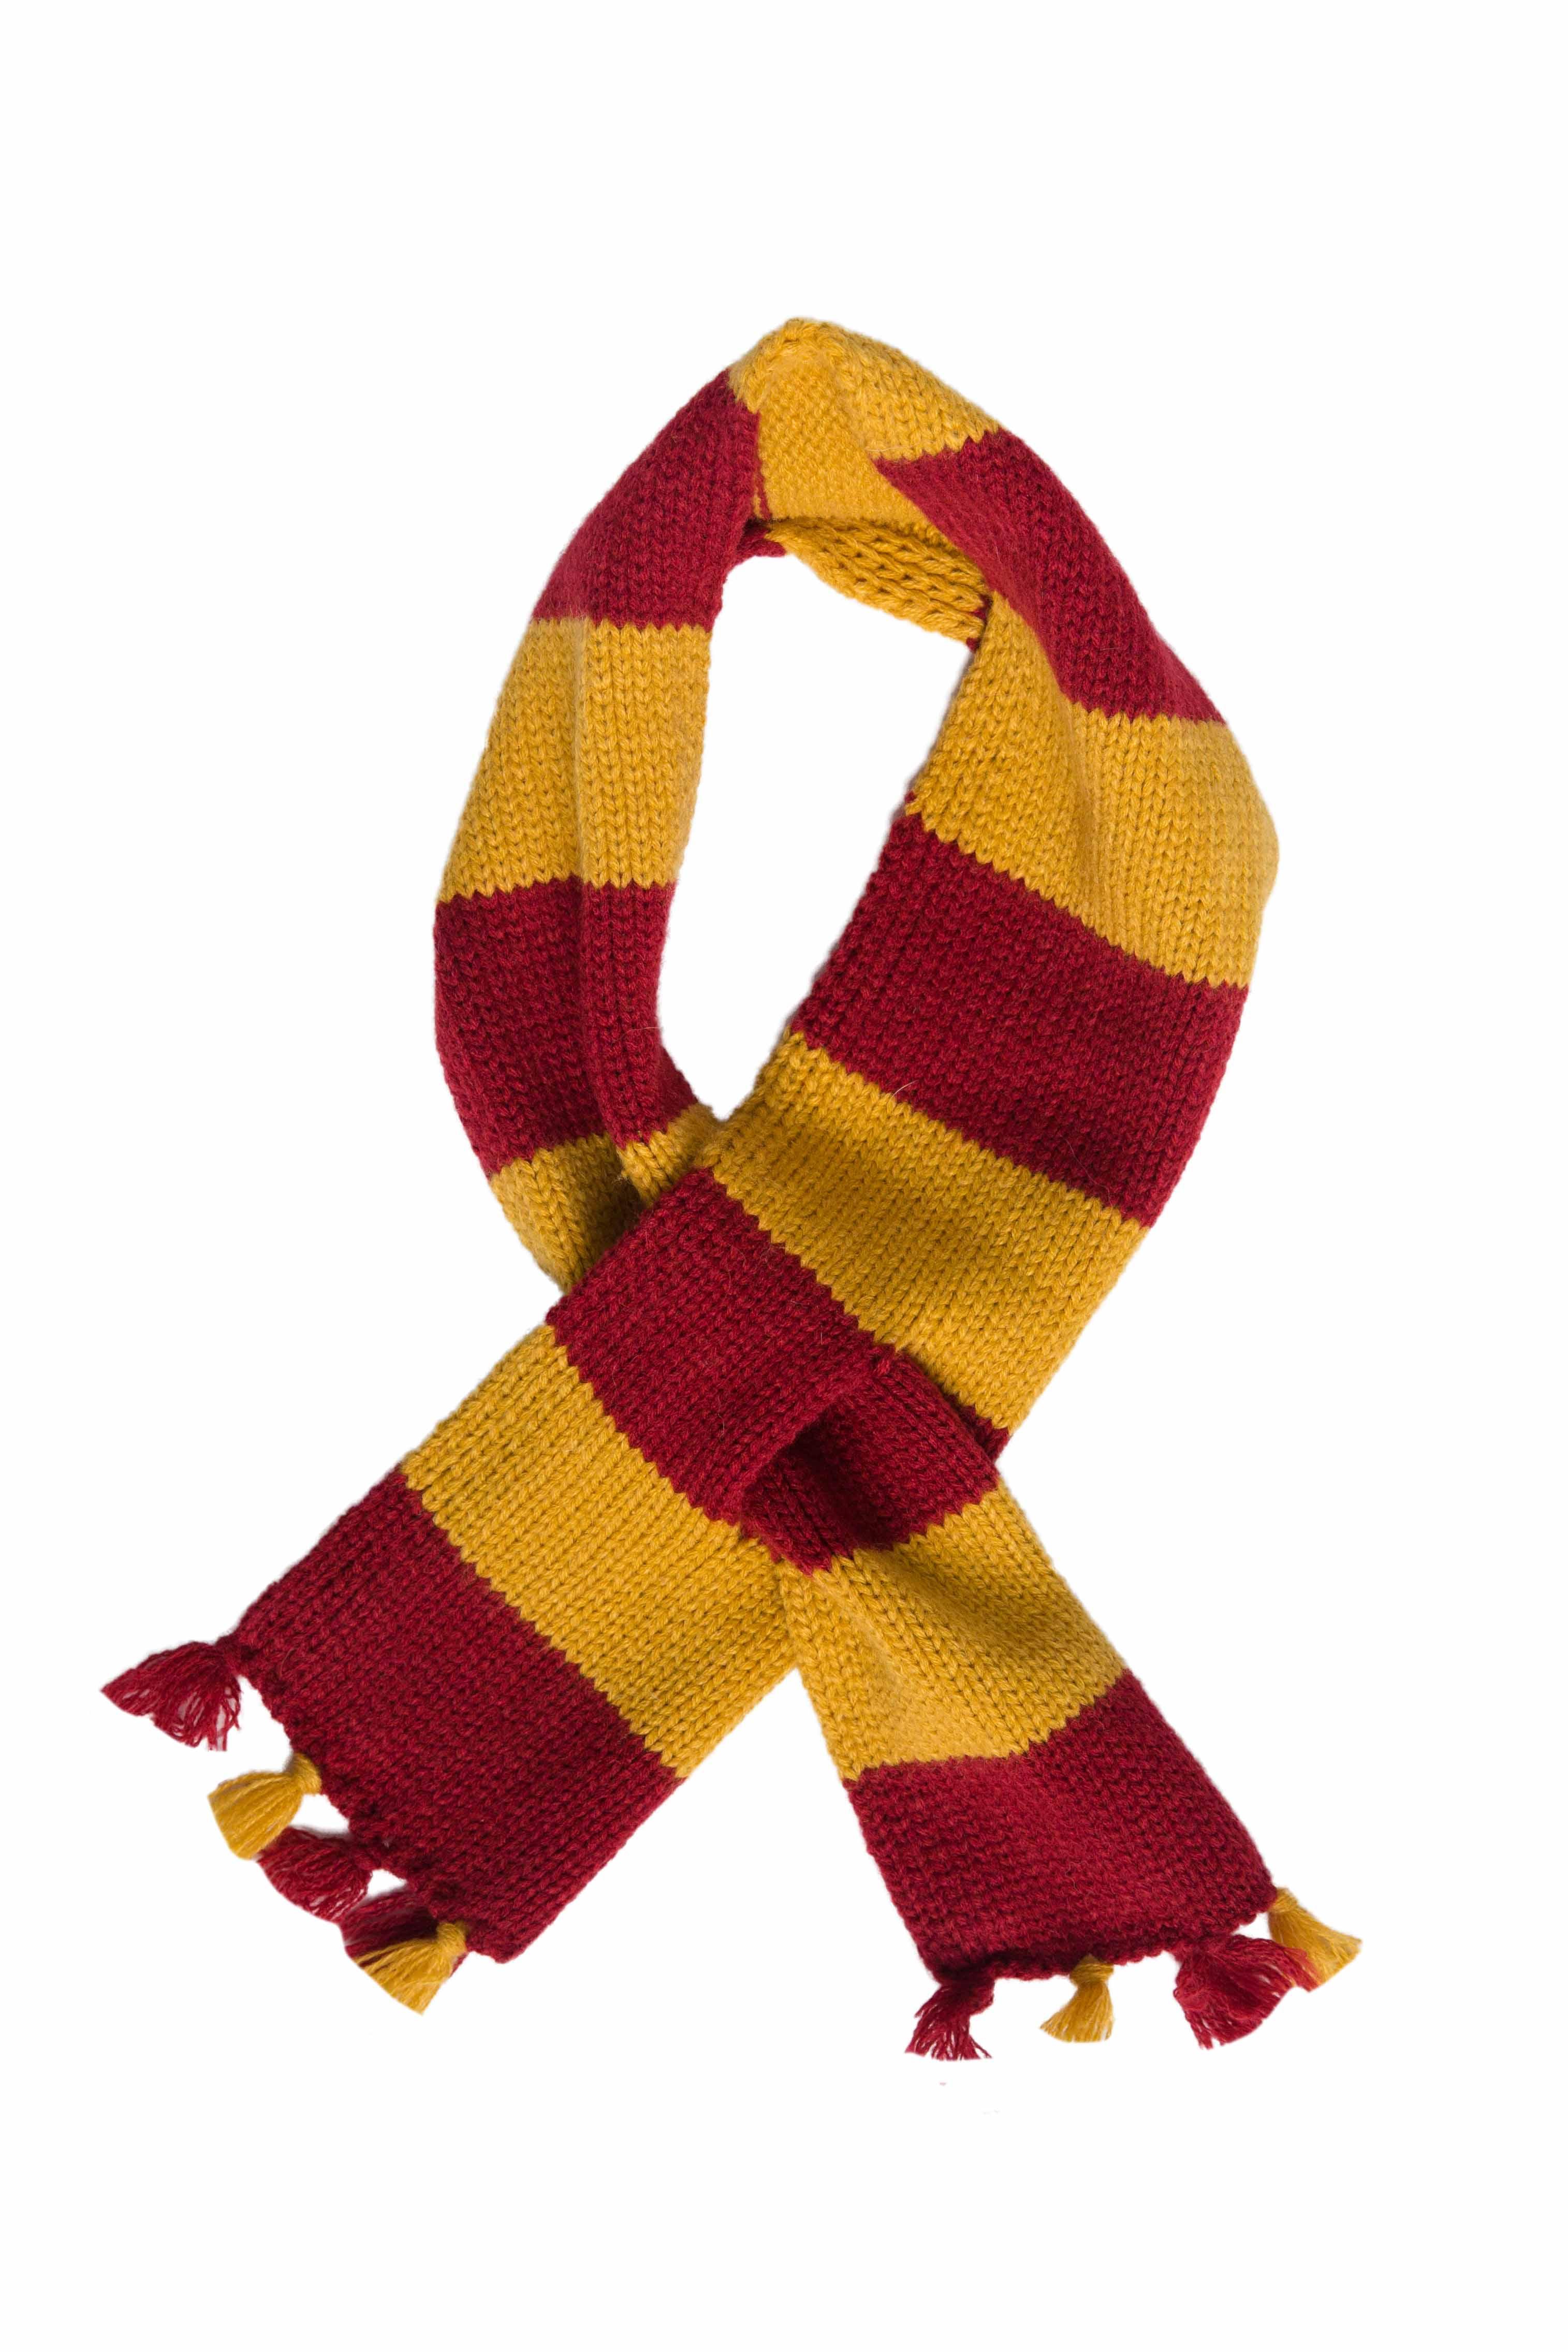 Hipster Wizard Striped Dog Scarf - Rocky & Maggie's Pet Boutique and Salon